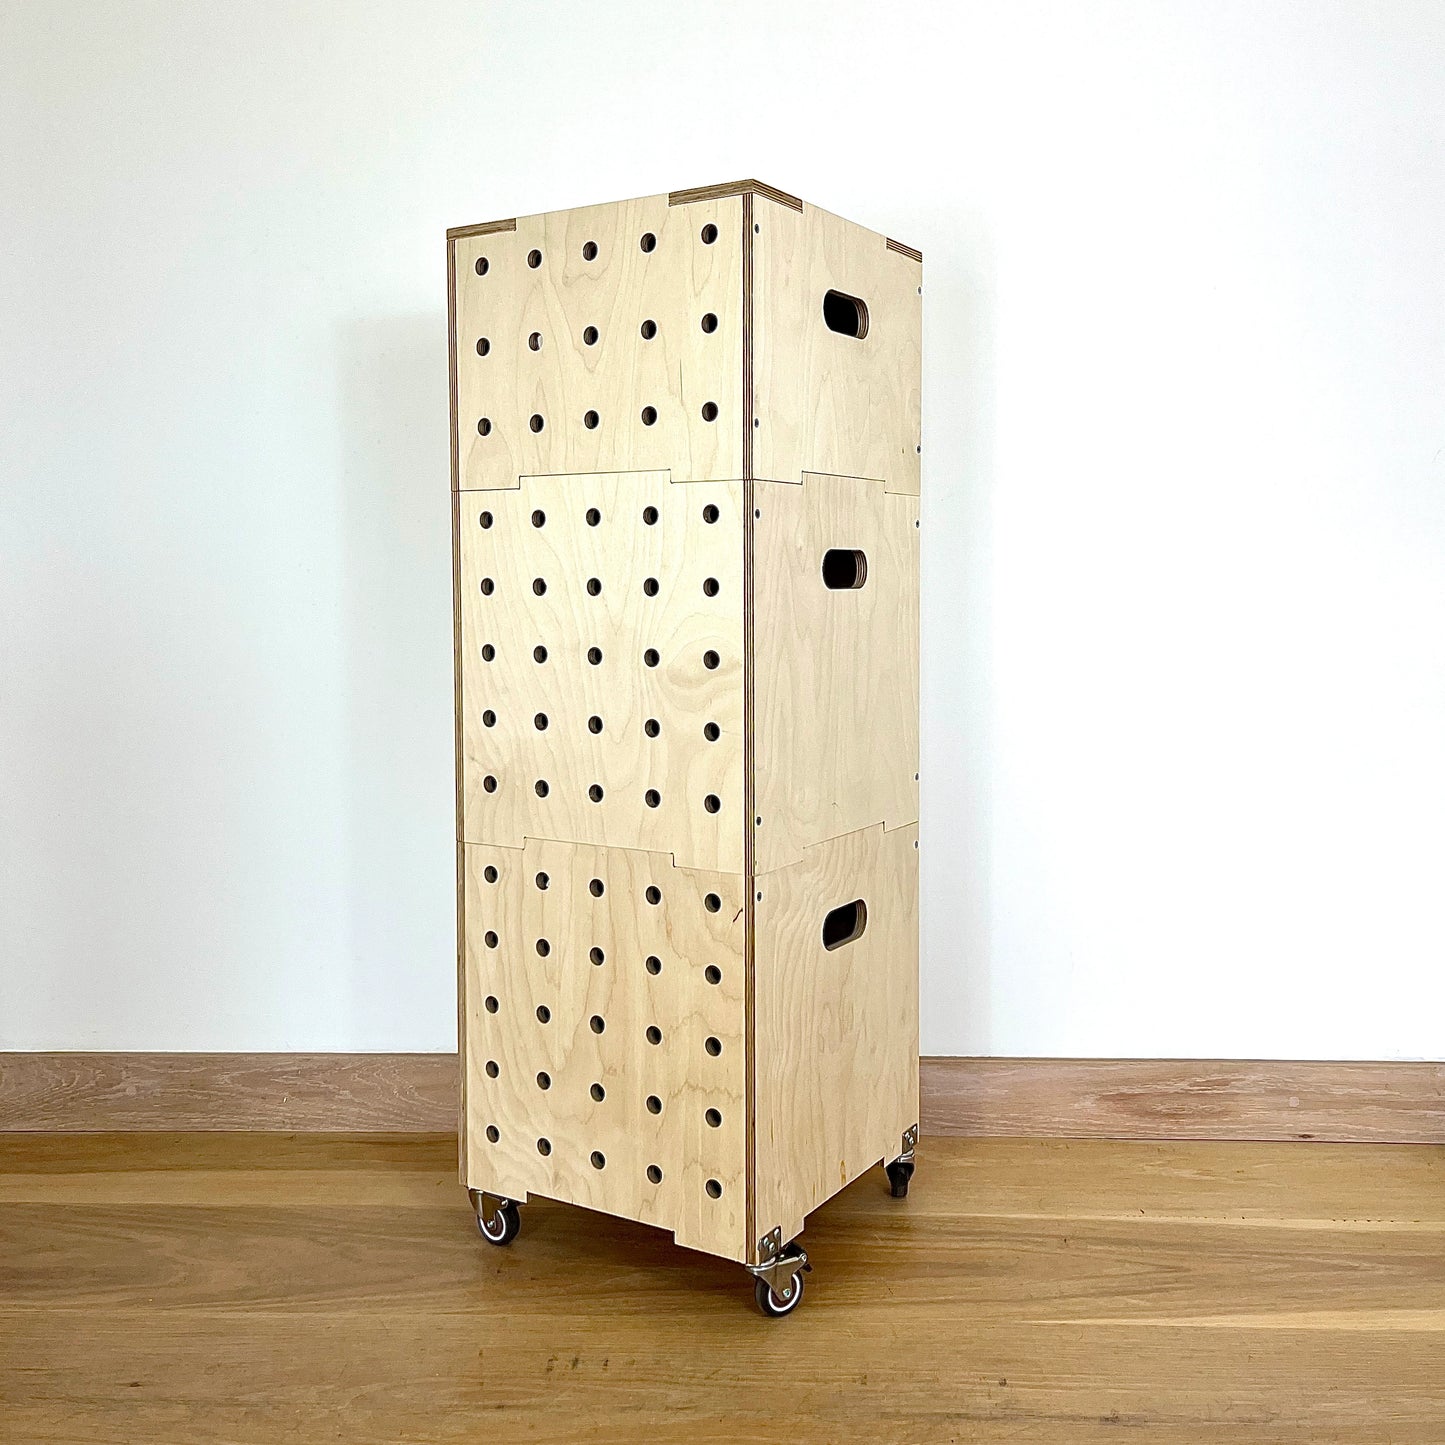 Stacking set of 3 birch wood ply square vinyl storage crates with 5 rows of vertical drilled holes on one side, hand holes on the other sitting on castors on a wood floor against a white wall facing to the left at angle